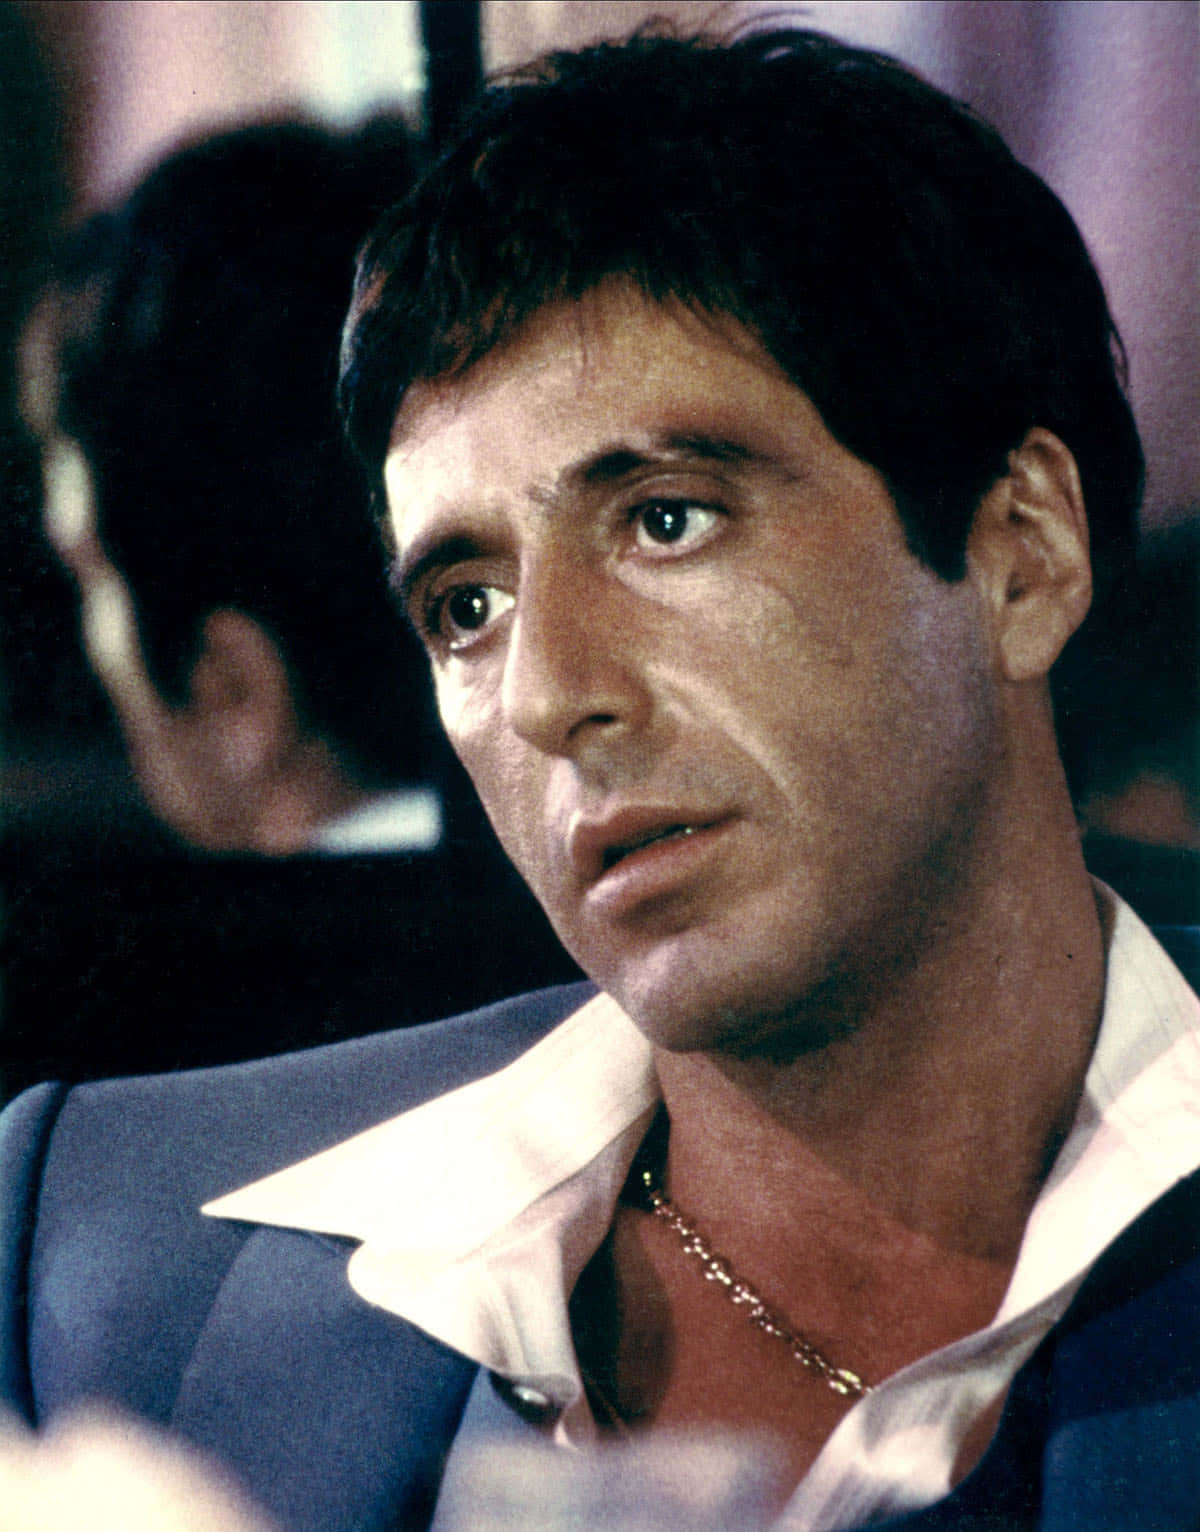 Al Pacino as Tony Montana in 'Scarface': The world is his oyster